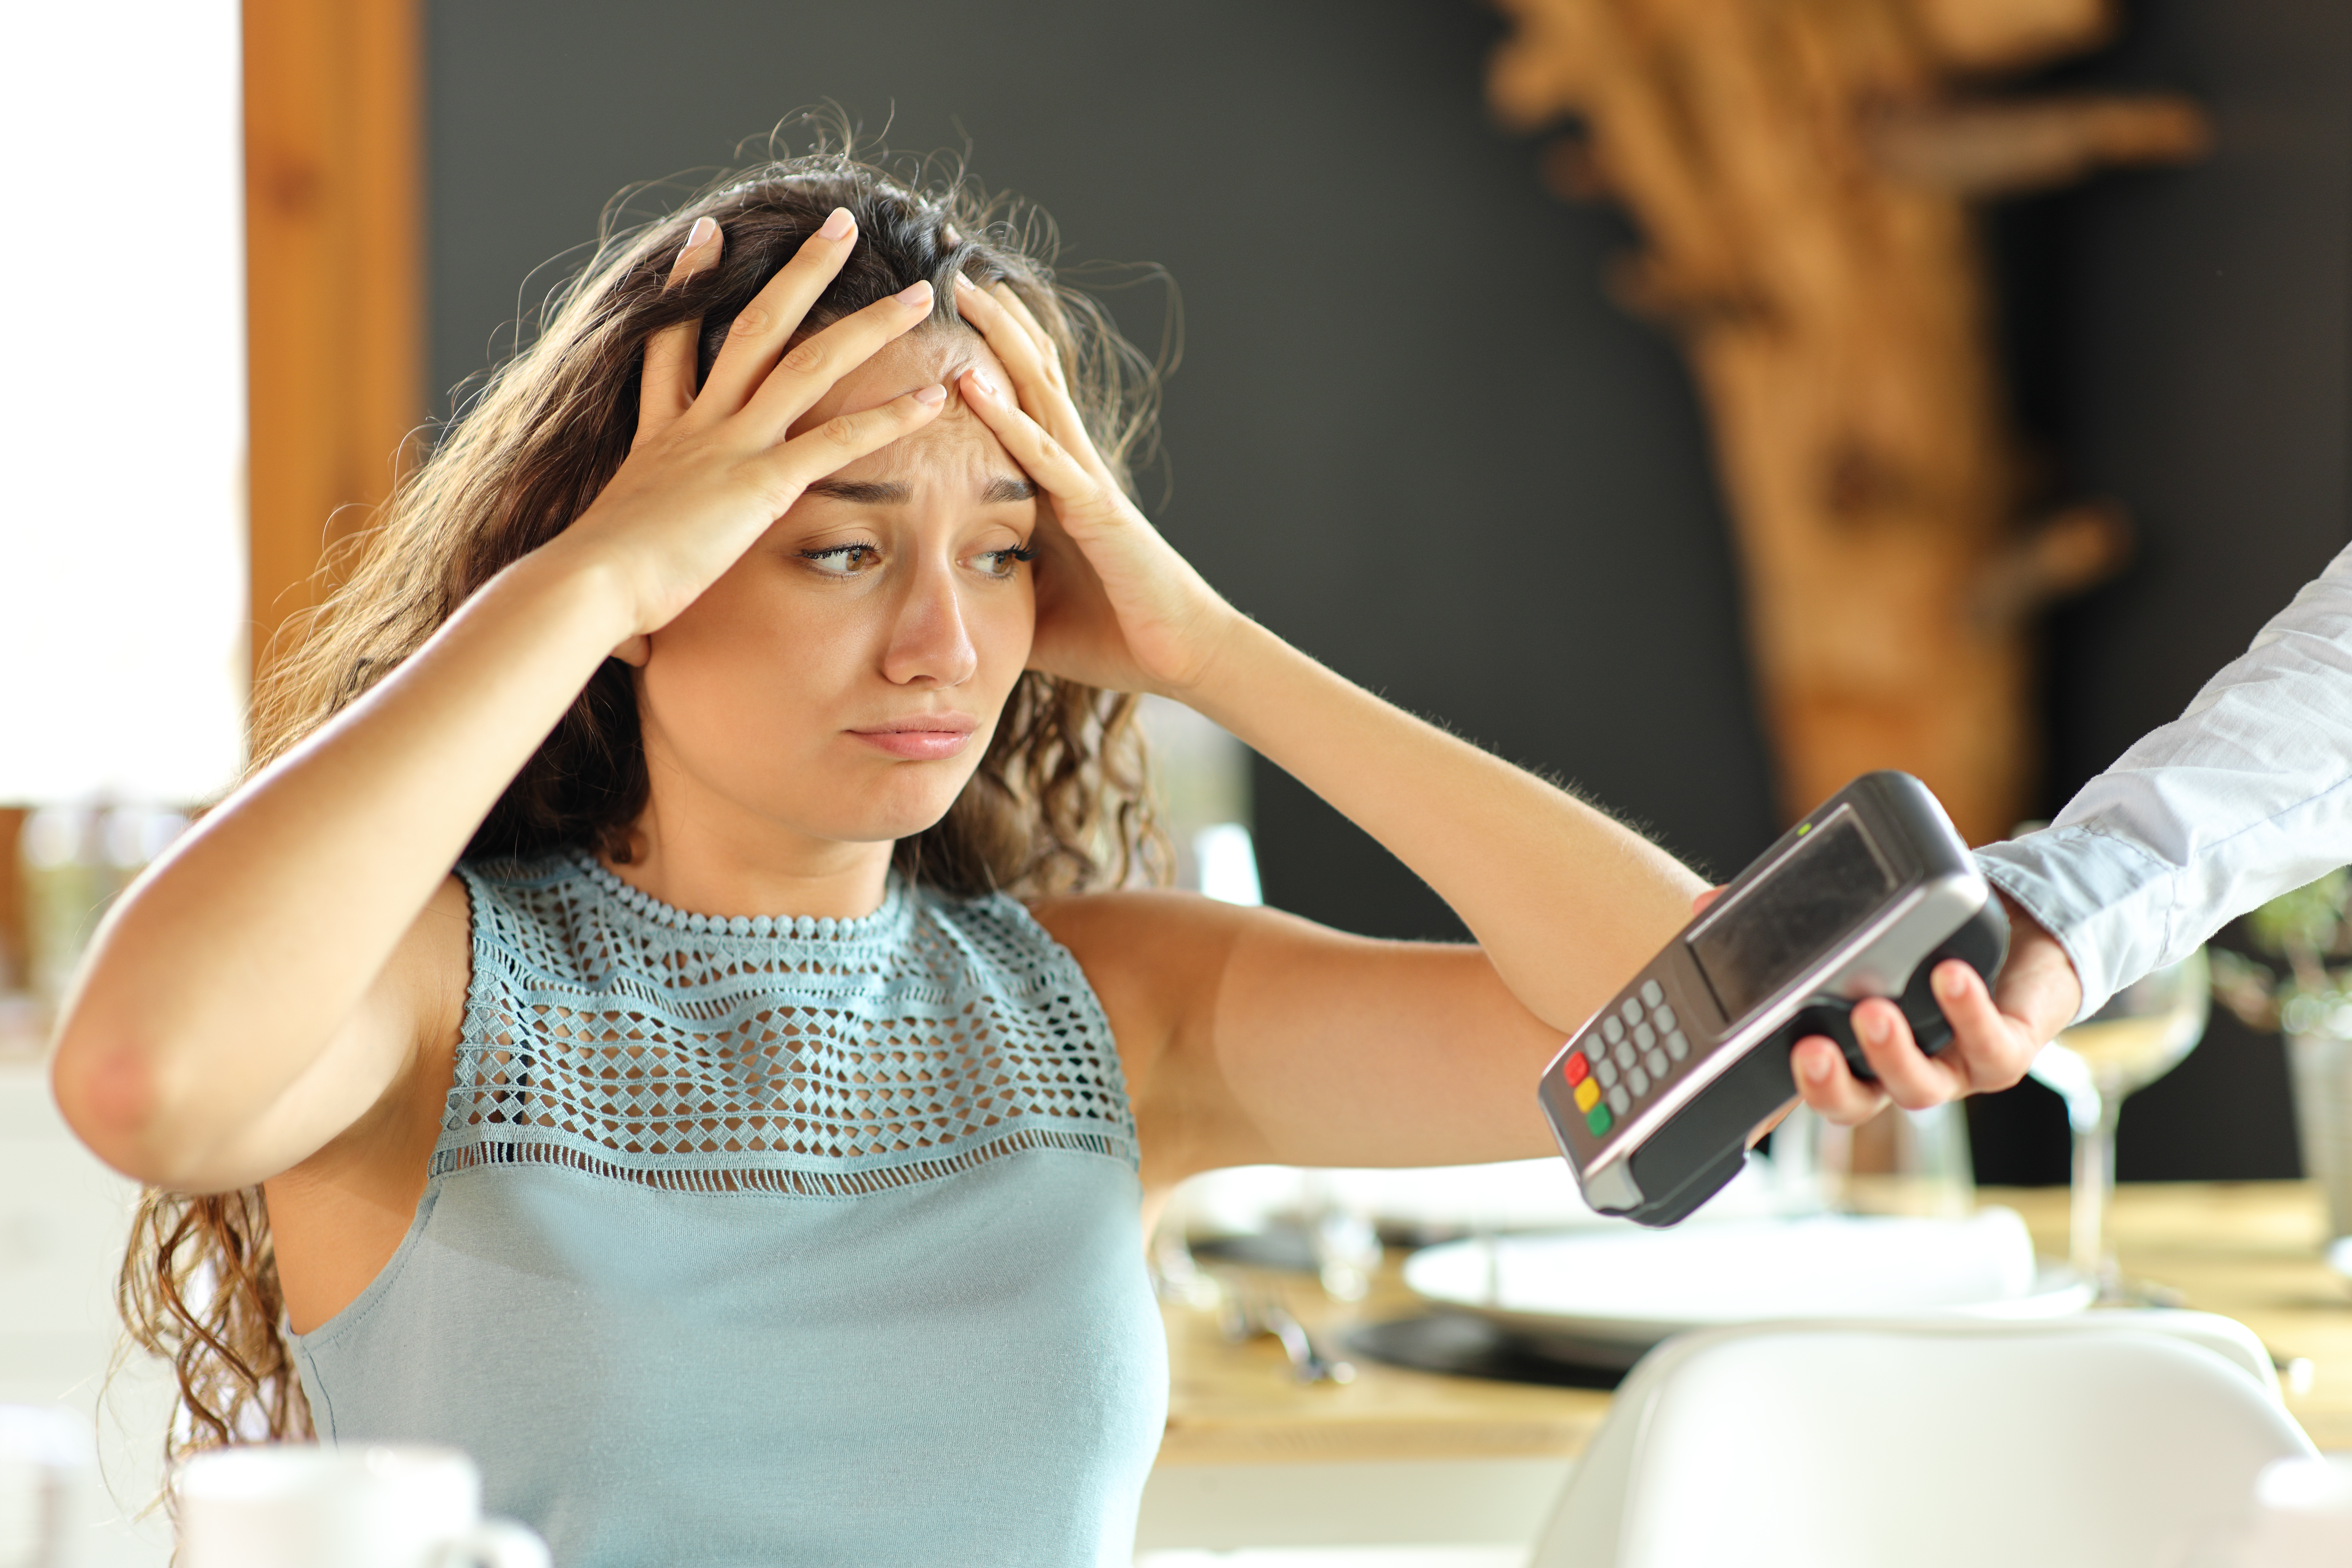 A woman looking desperate as a credit card machine is handed to her | Source: Shutterstock